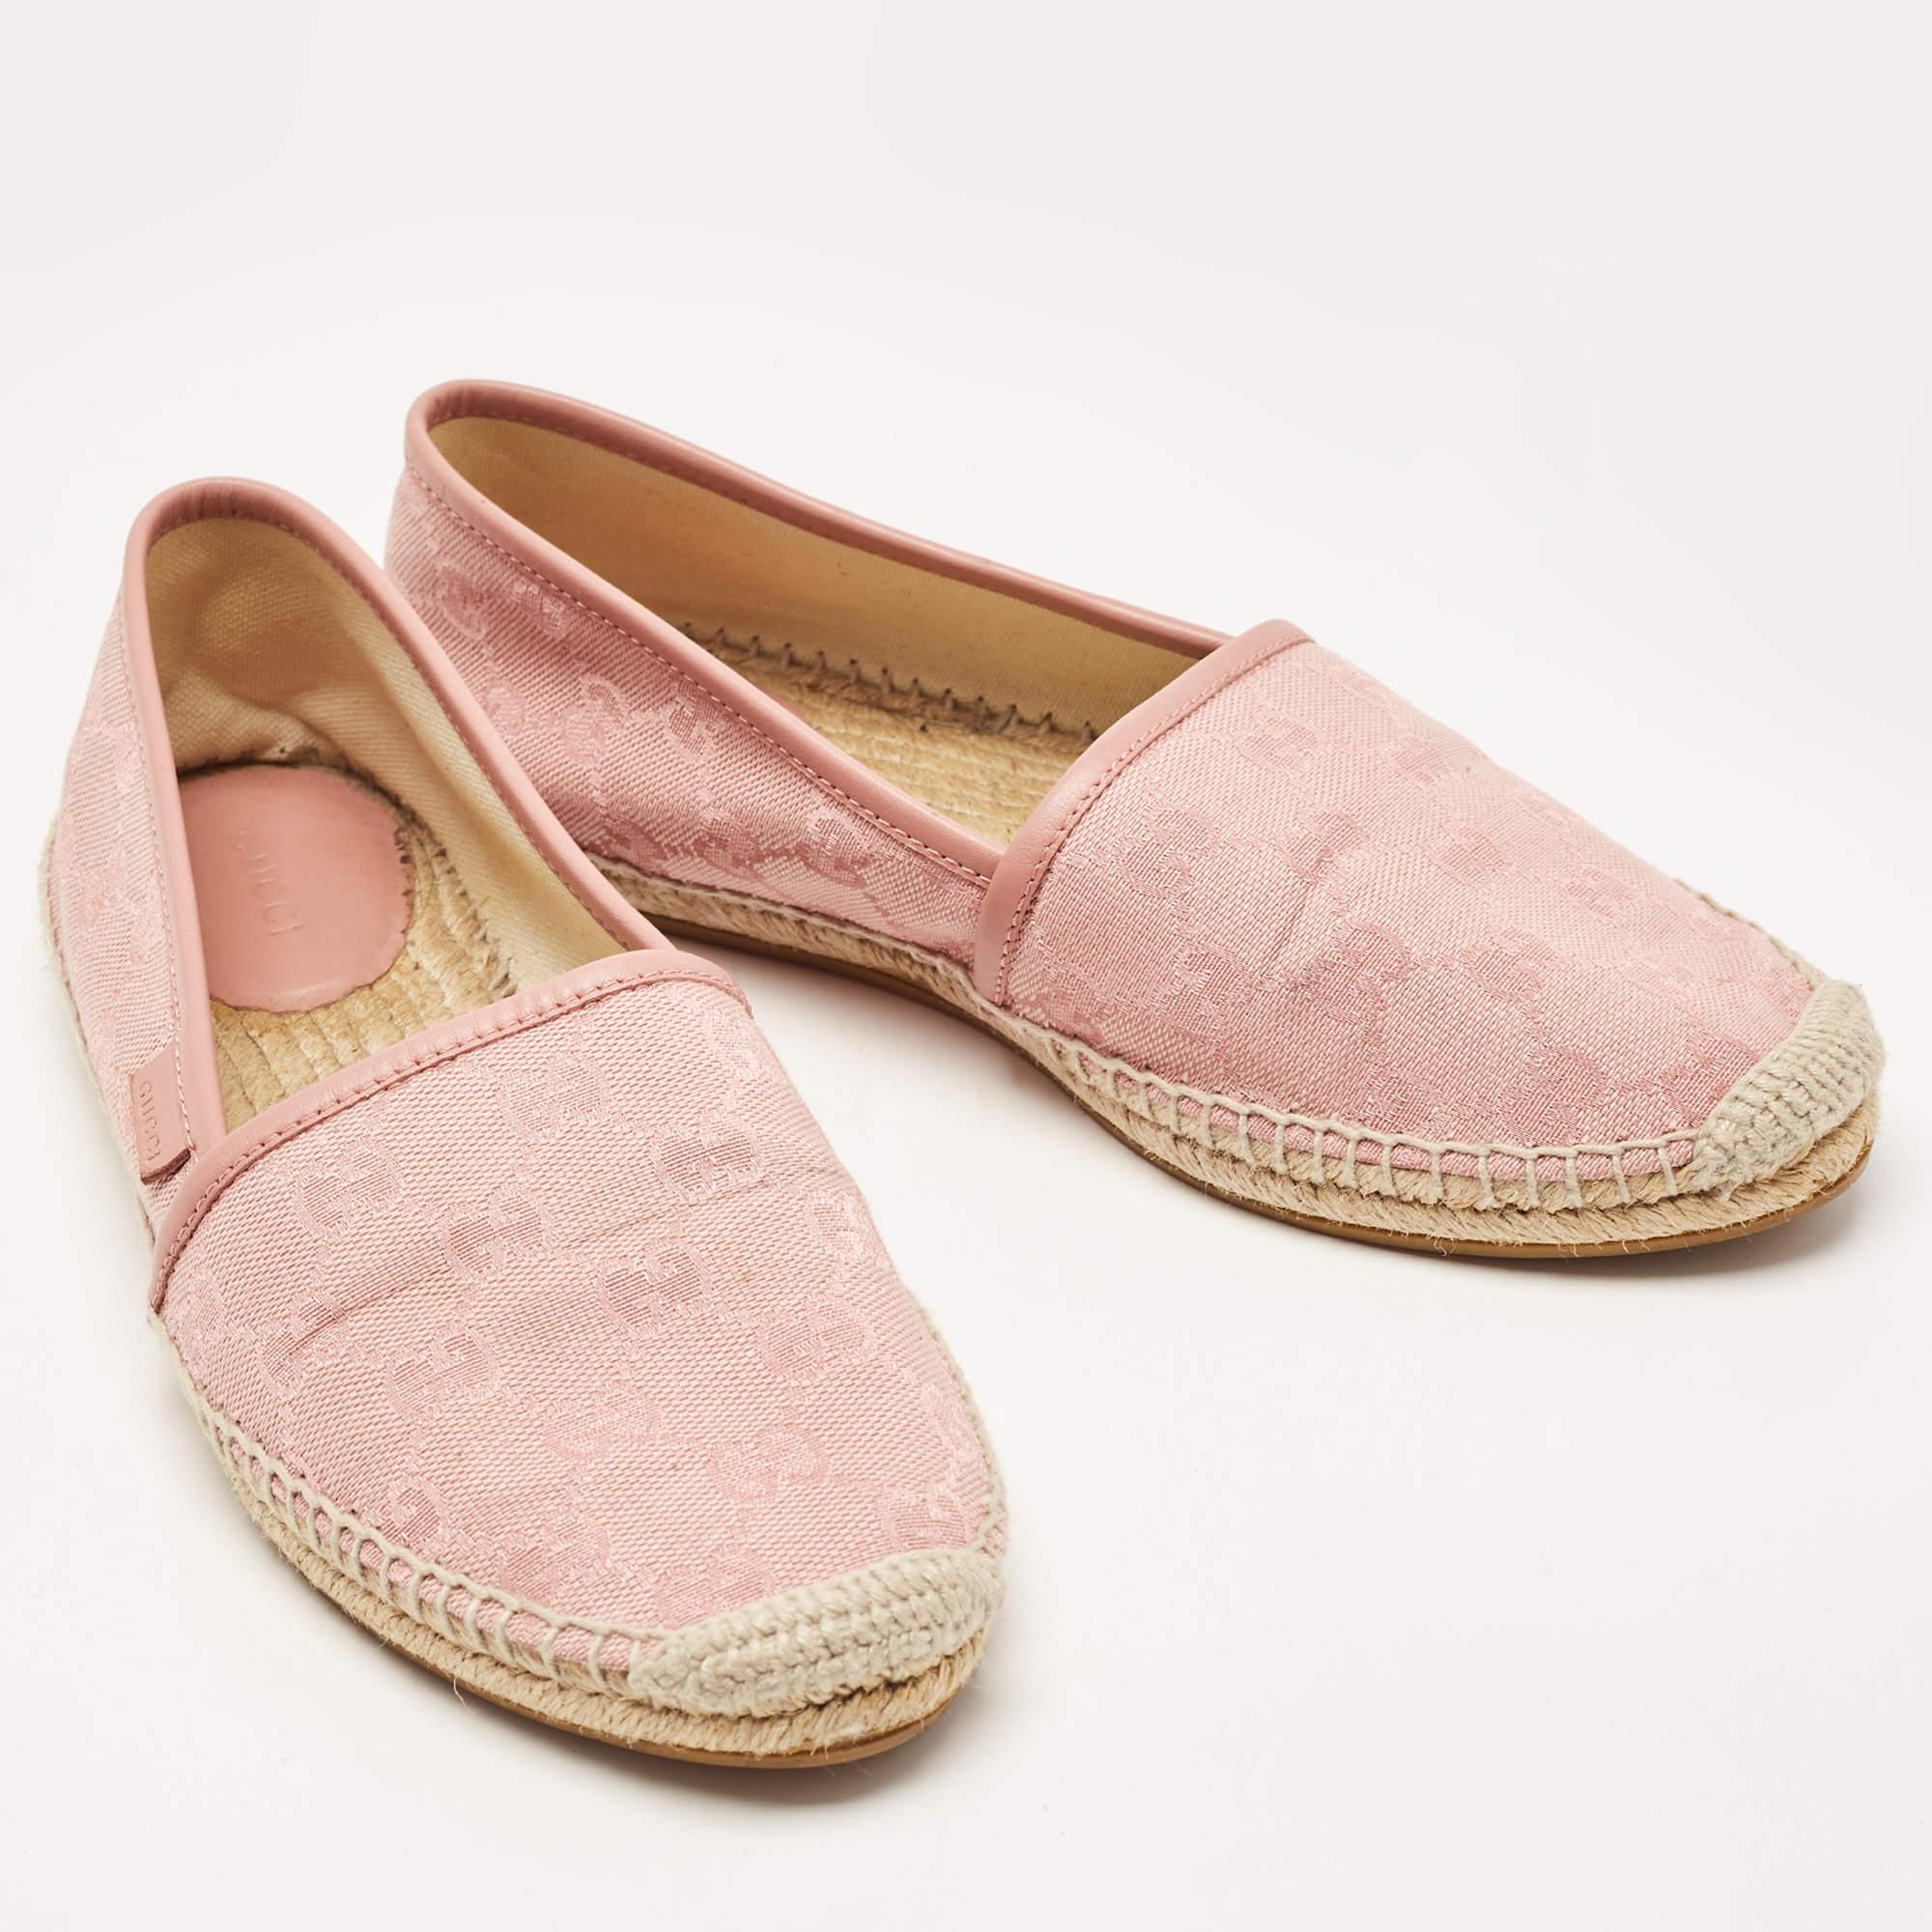 Gucci Pink GG Canvas and Leather Espadrille Flats Size 38 In Good Condition For Sale In Dubai, Al Qouz 2